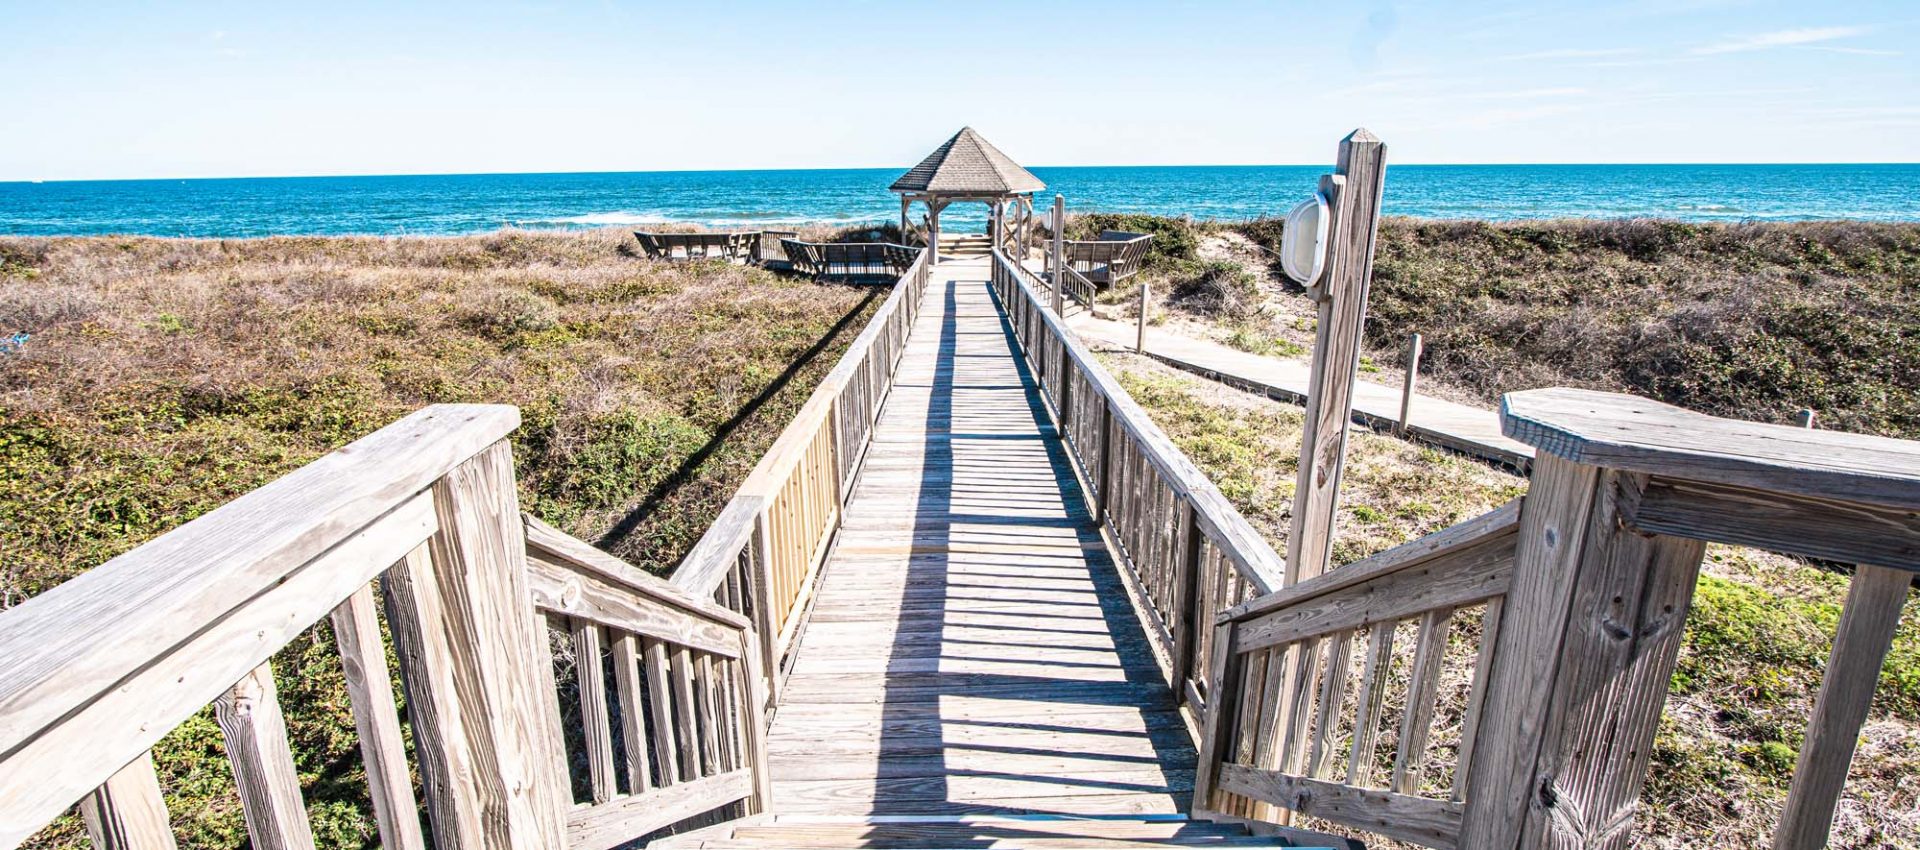 Photo of pathway from resort to the beach with gazebo at the end, showcasing the ocean in the back.